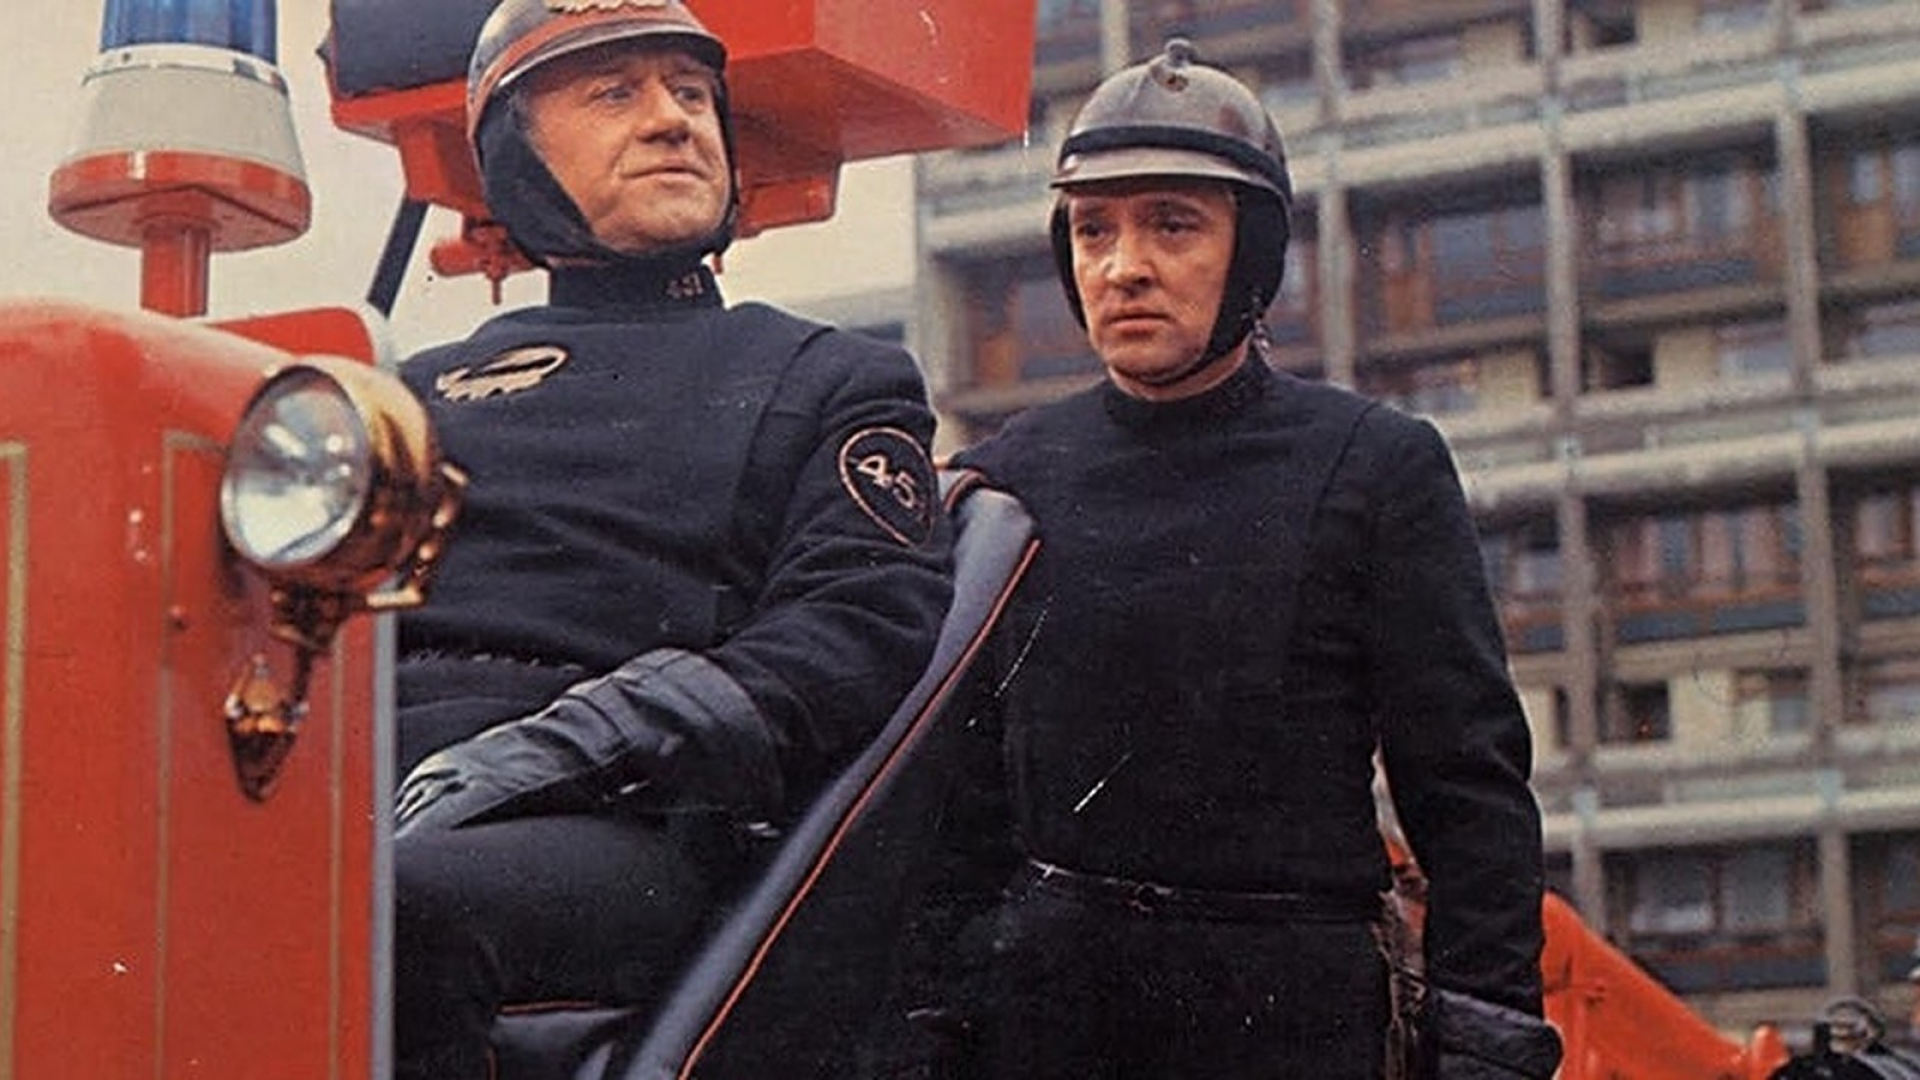 Film still from .Fahrenheit 451'. Two men in firefighter costumes and helmets standing on a fire truck.